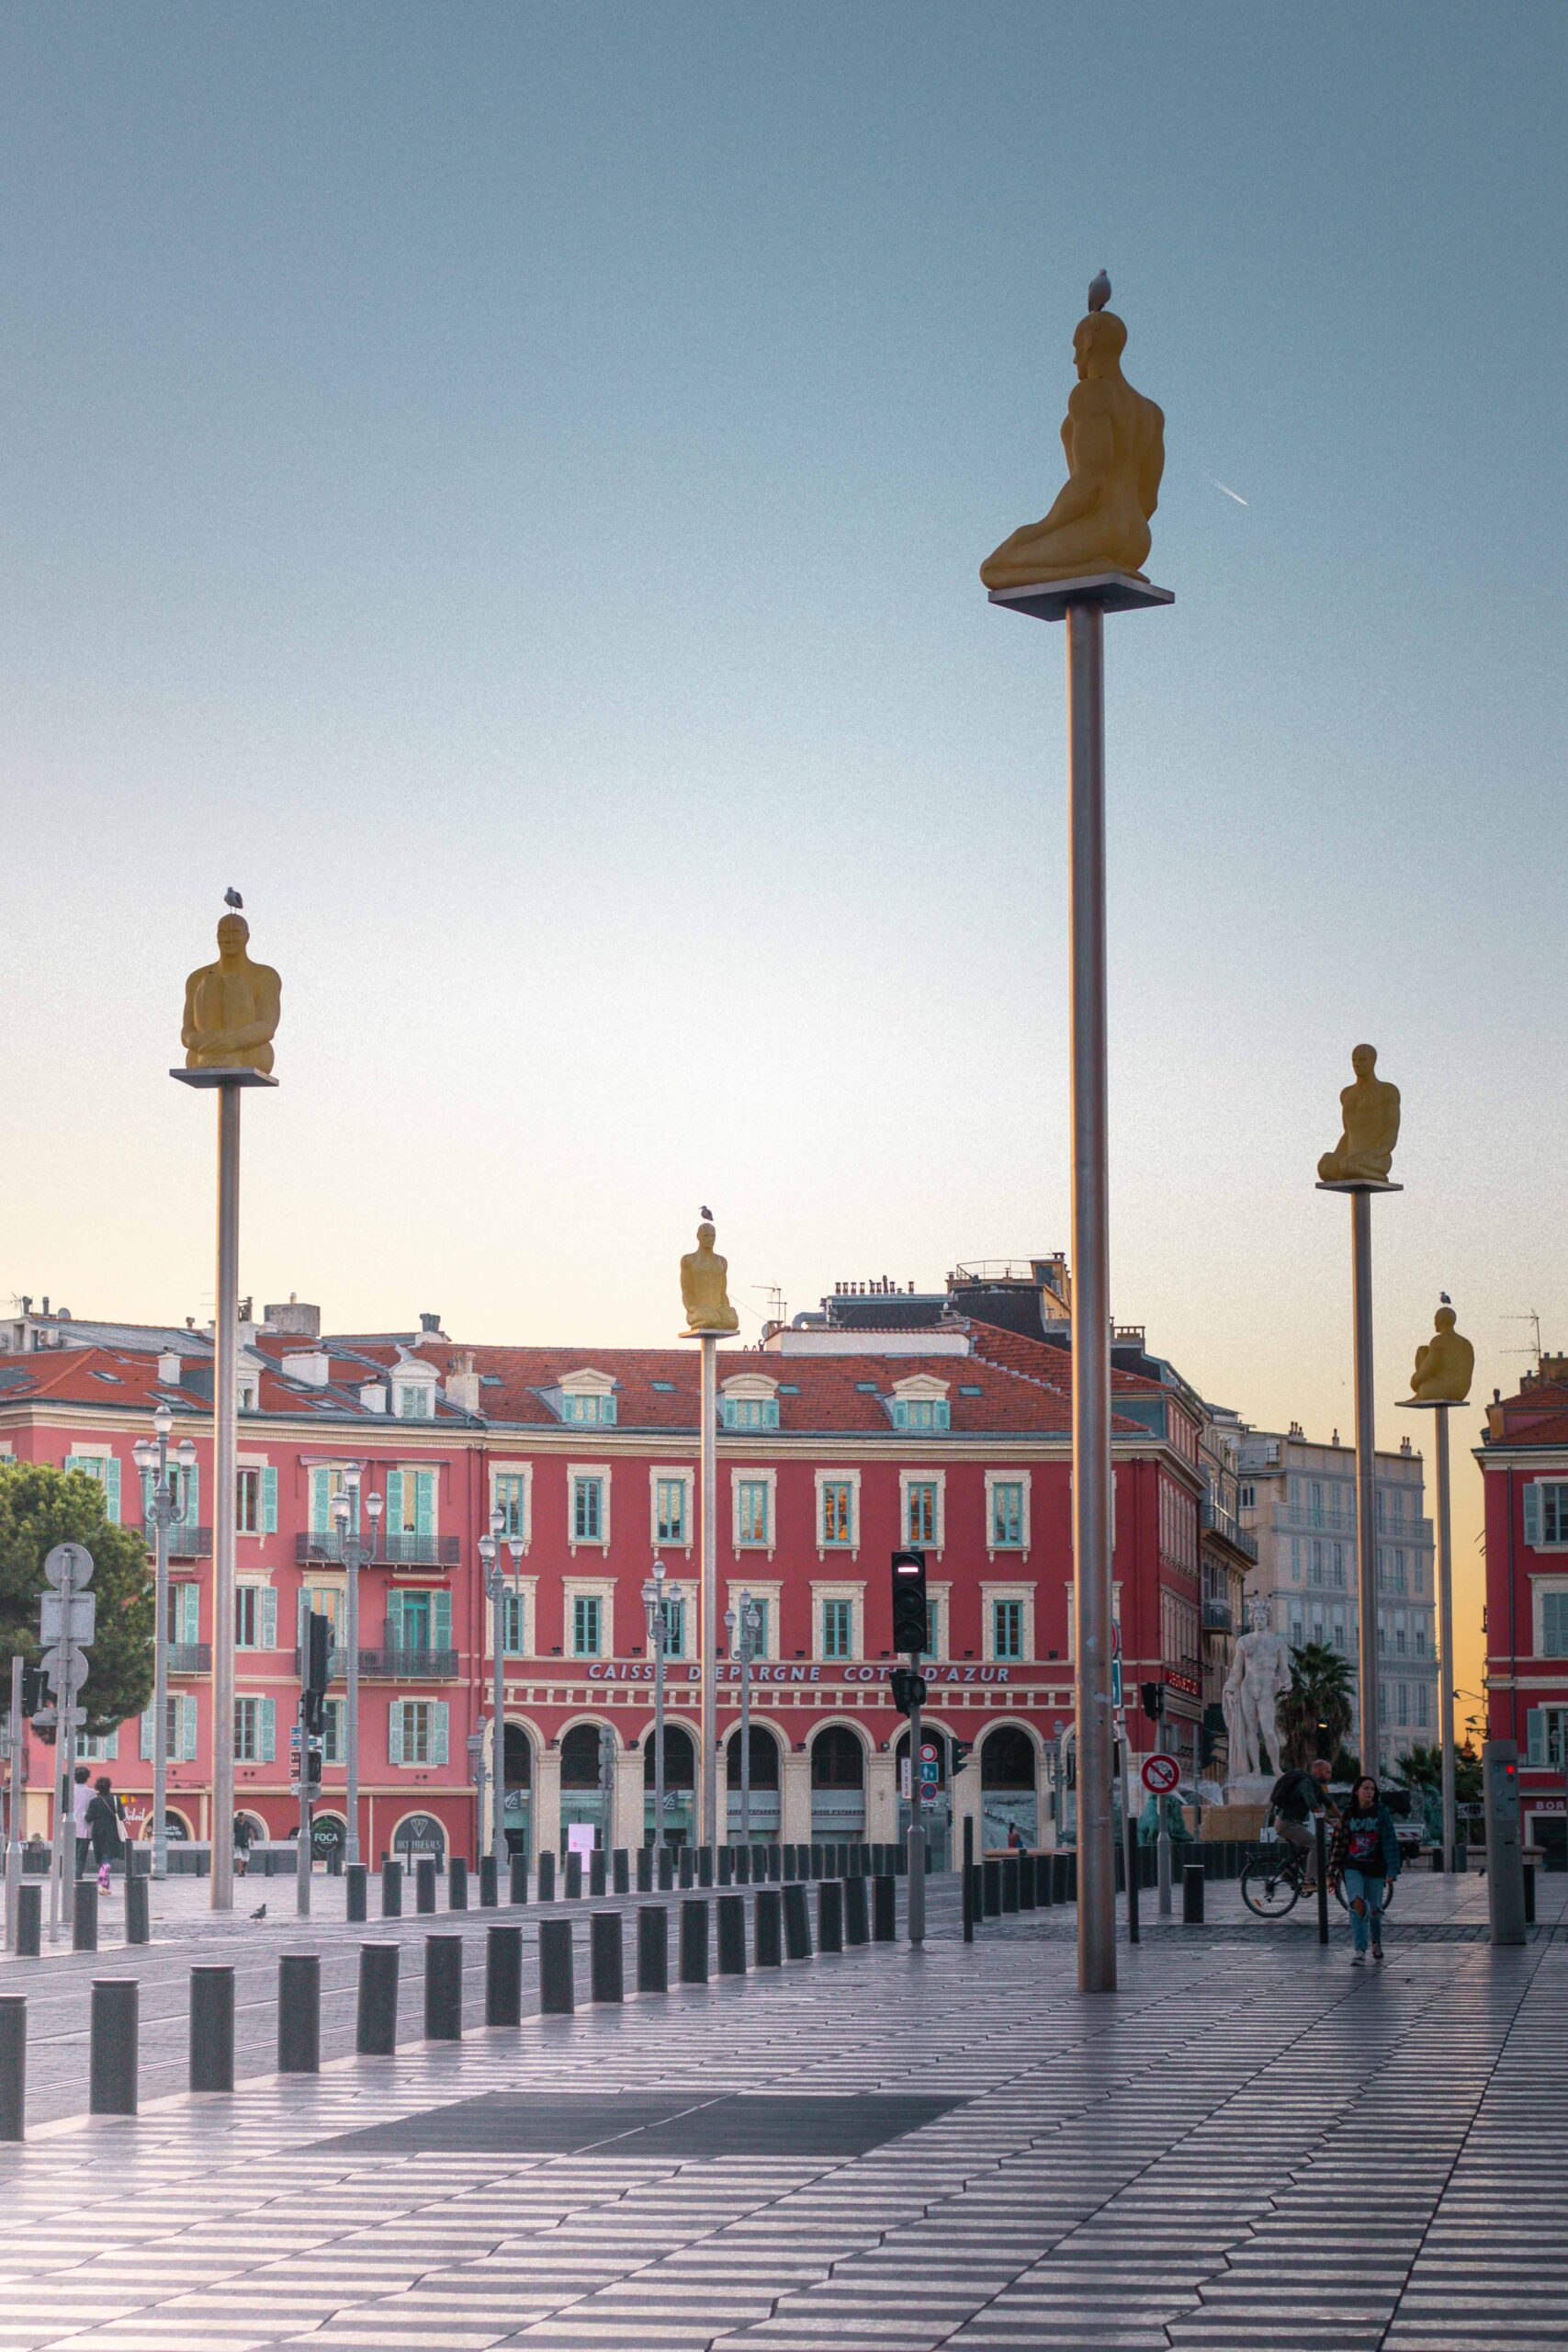 Pedestrians and statues of the artistic project "Conversation à Nice" during sunrise at Place Masséna in Nice, France